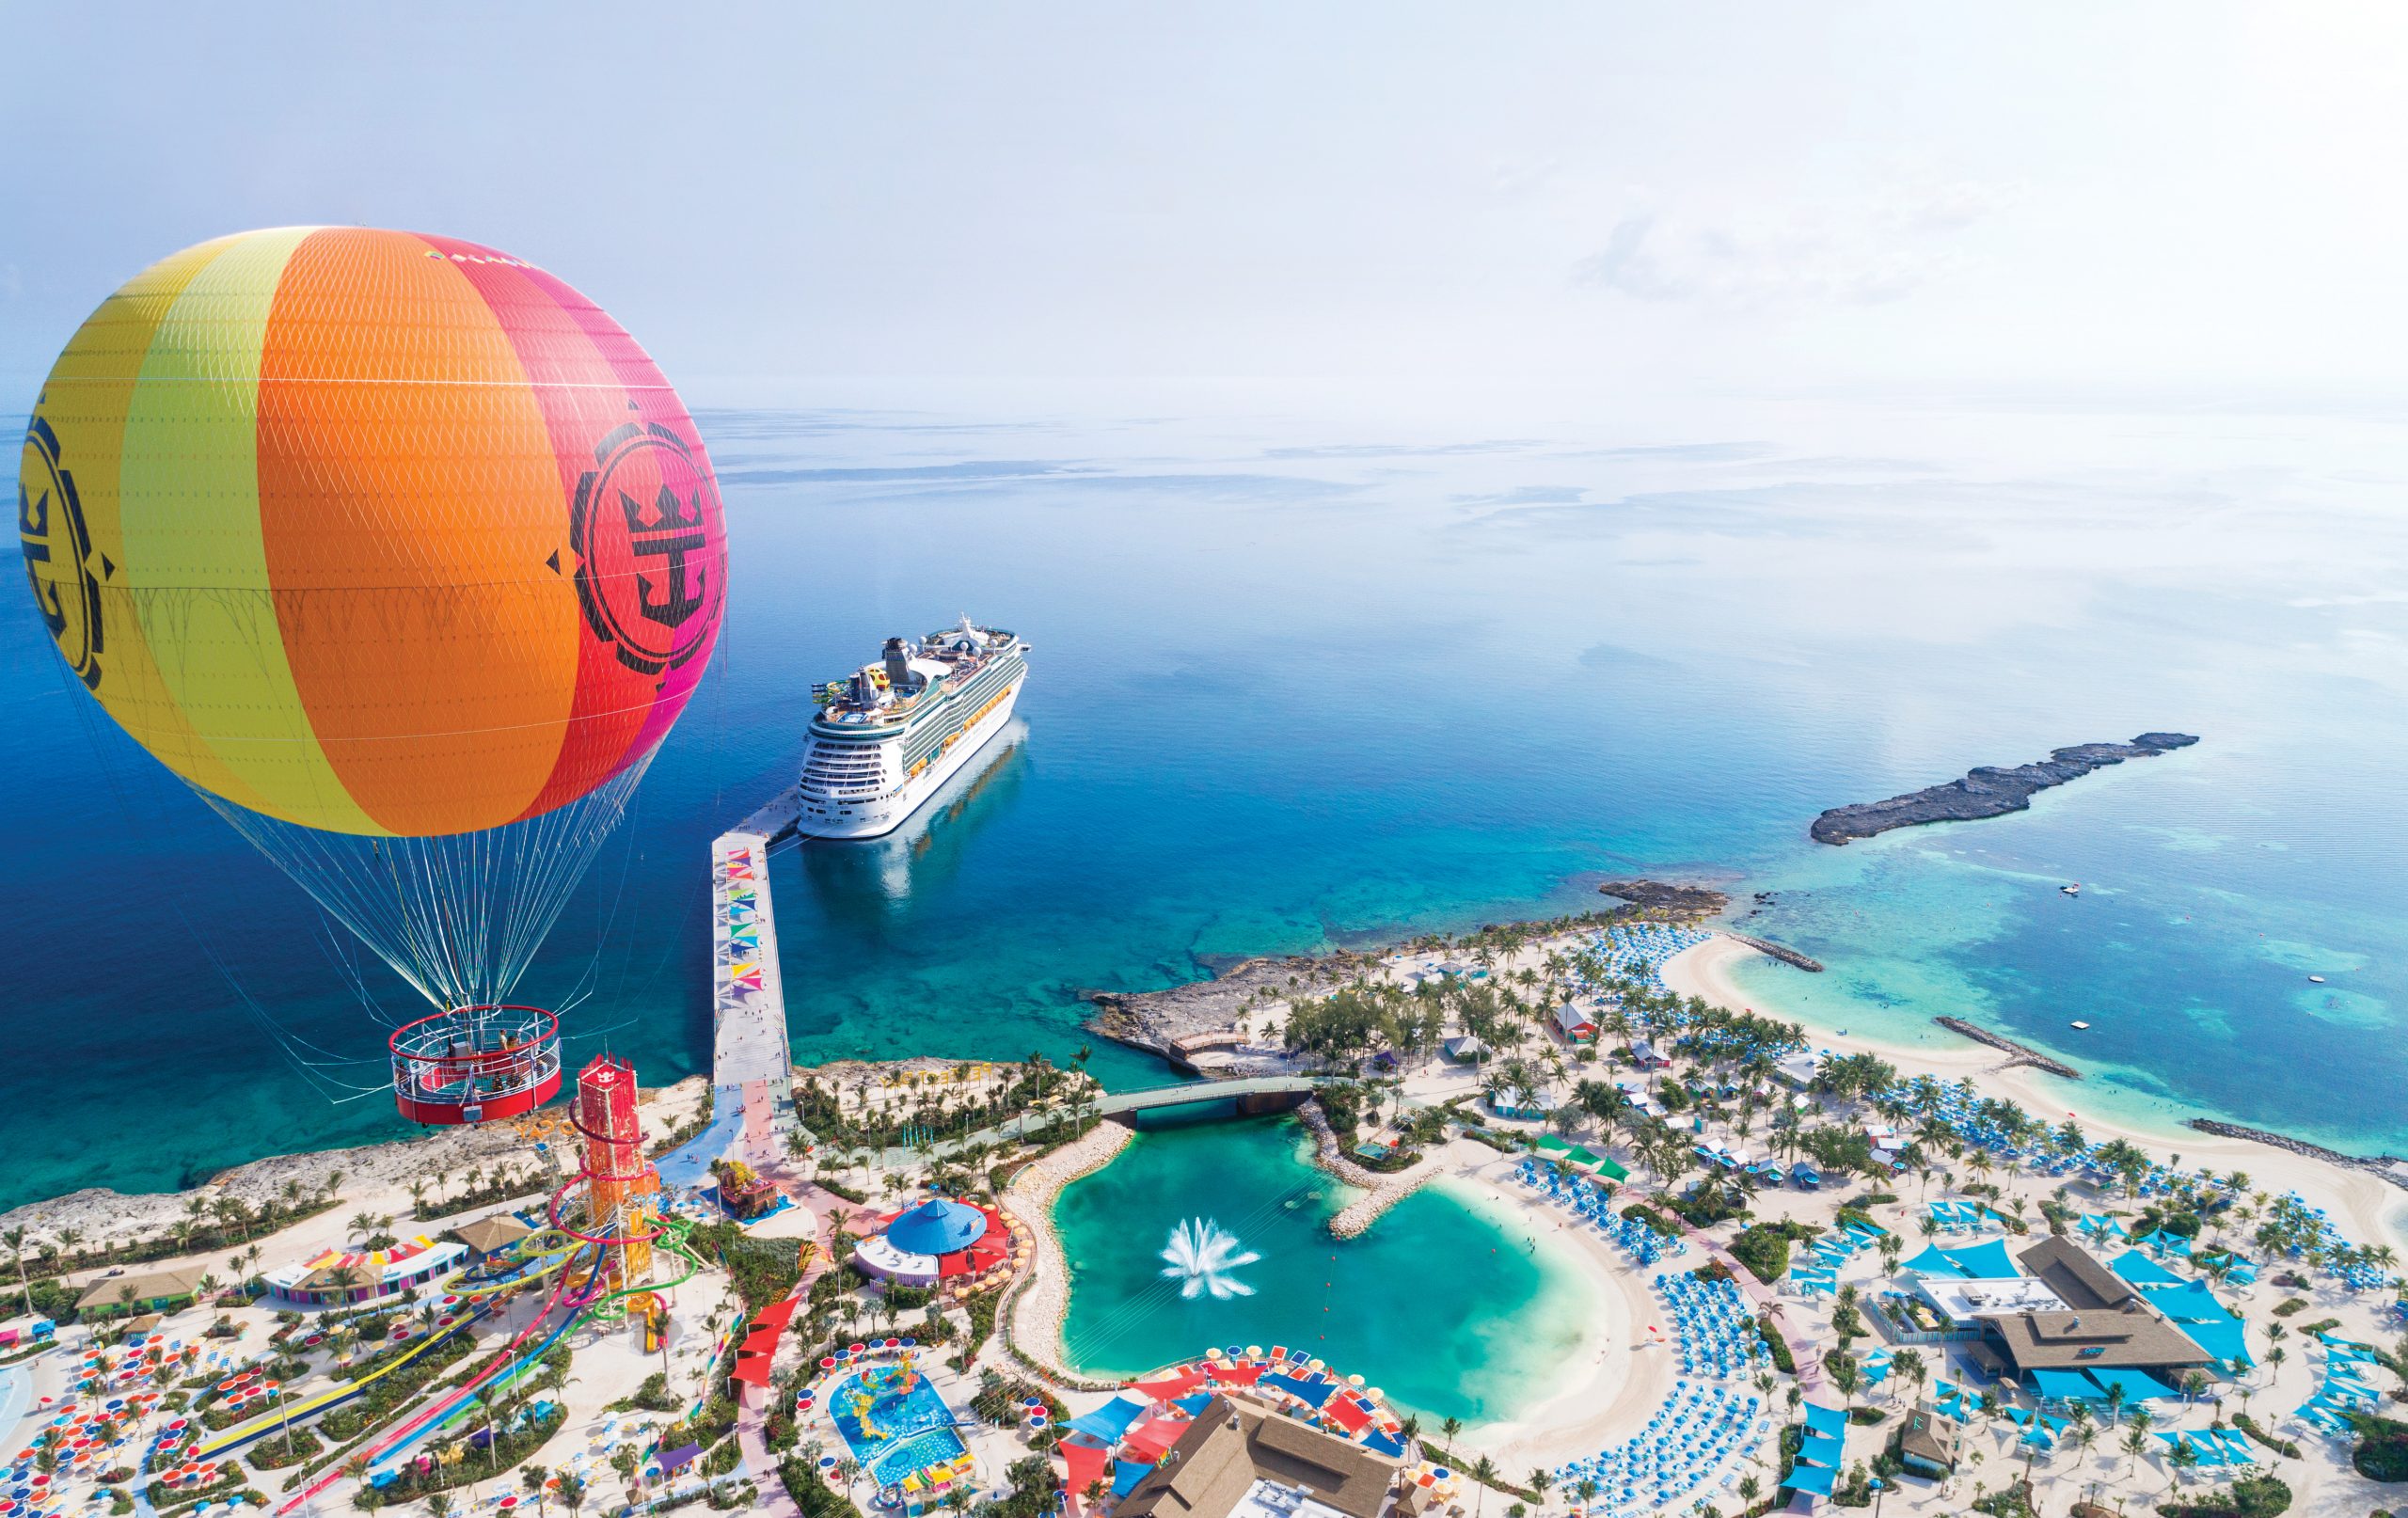 10 Essential Things to Know Before Visiting Perfect Day at CocoCay